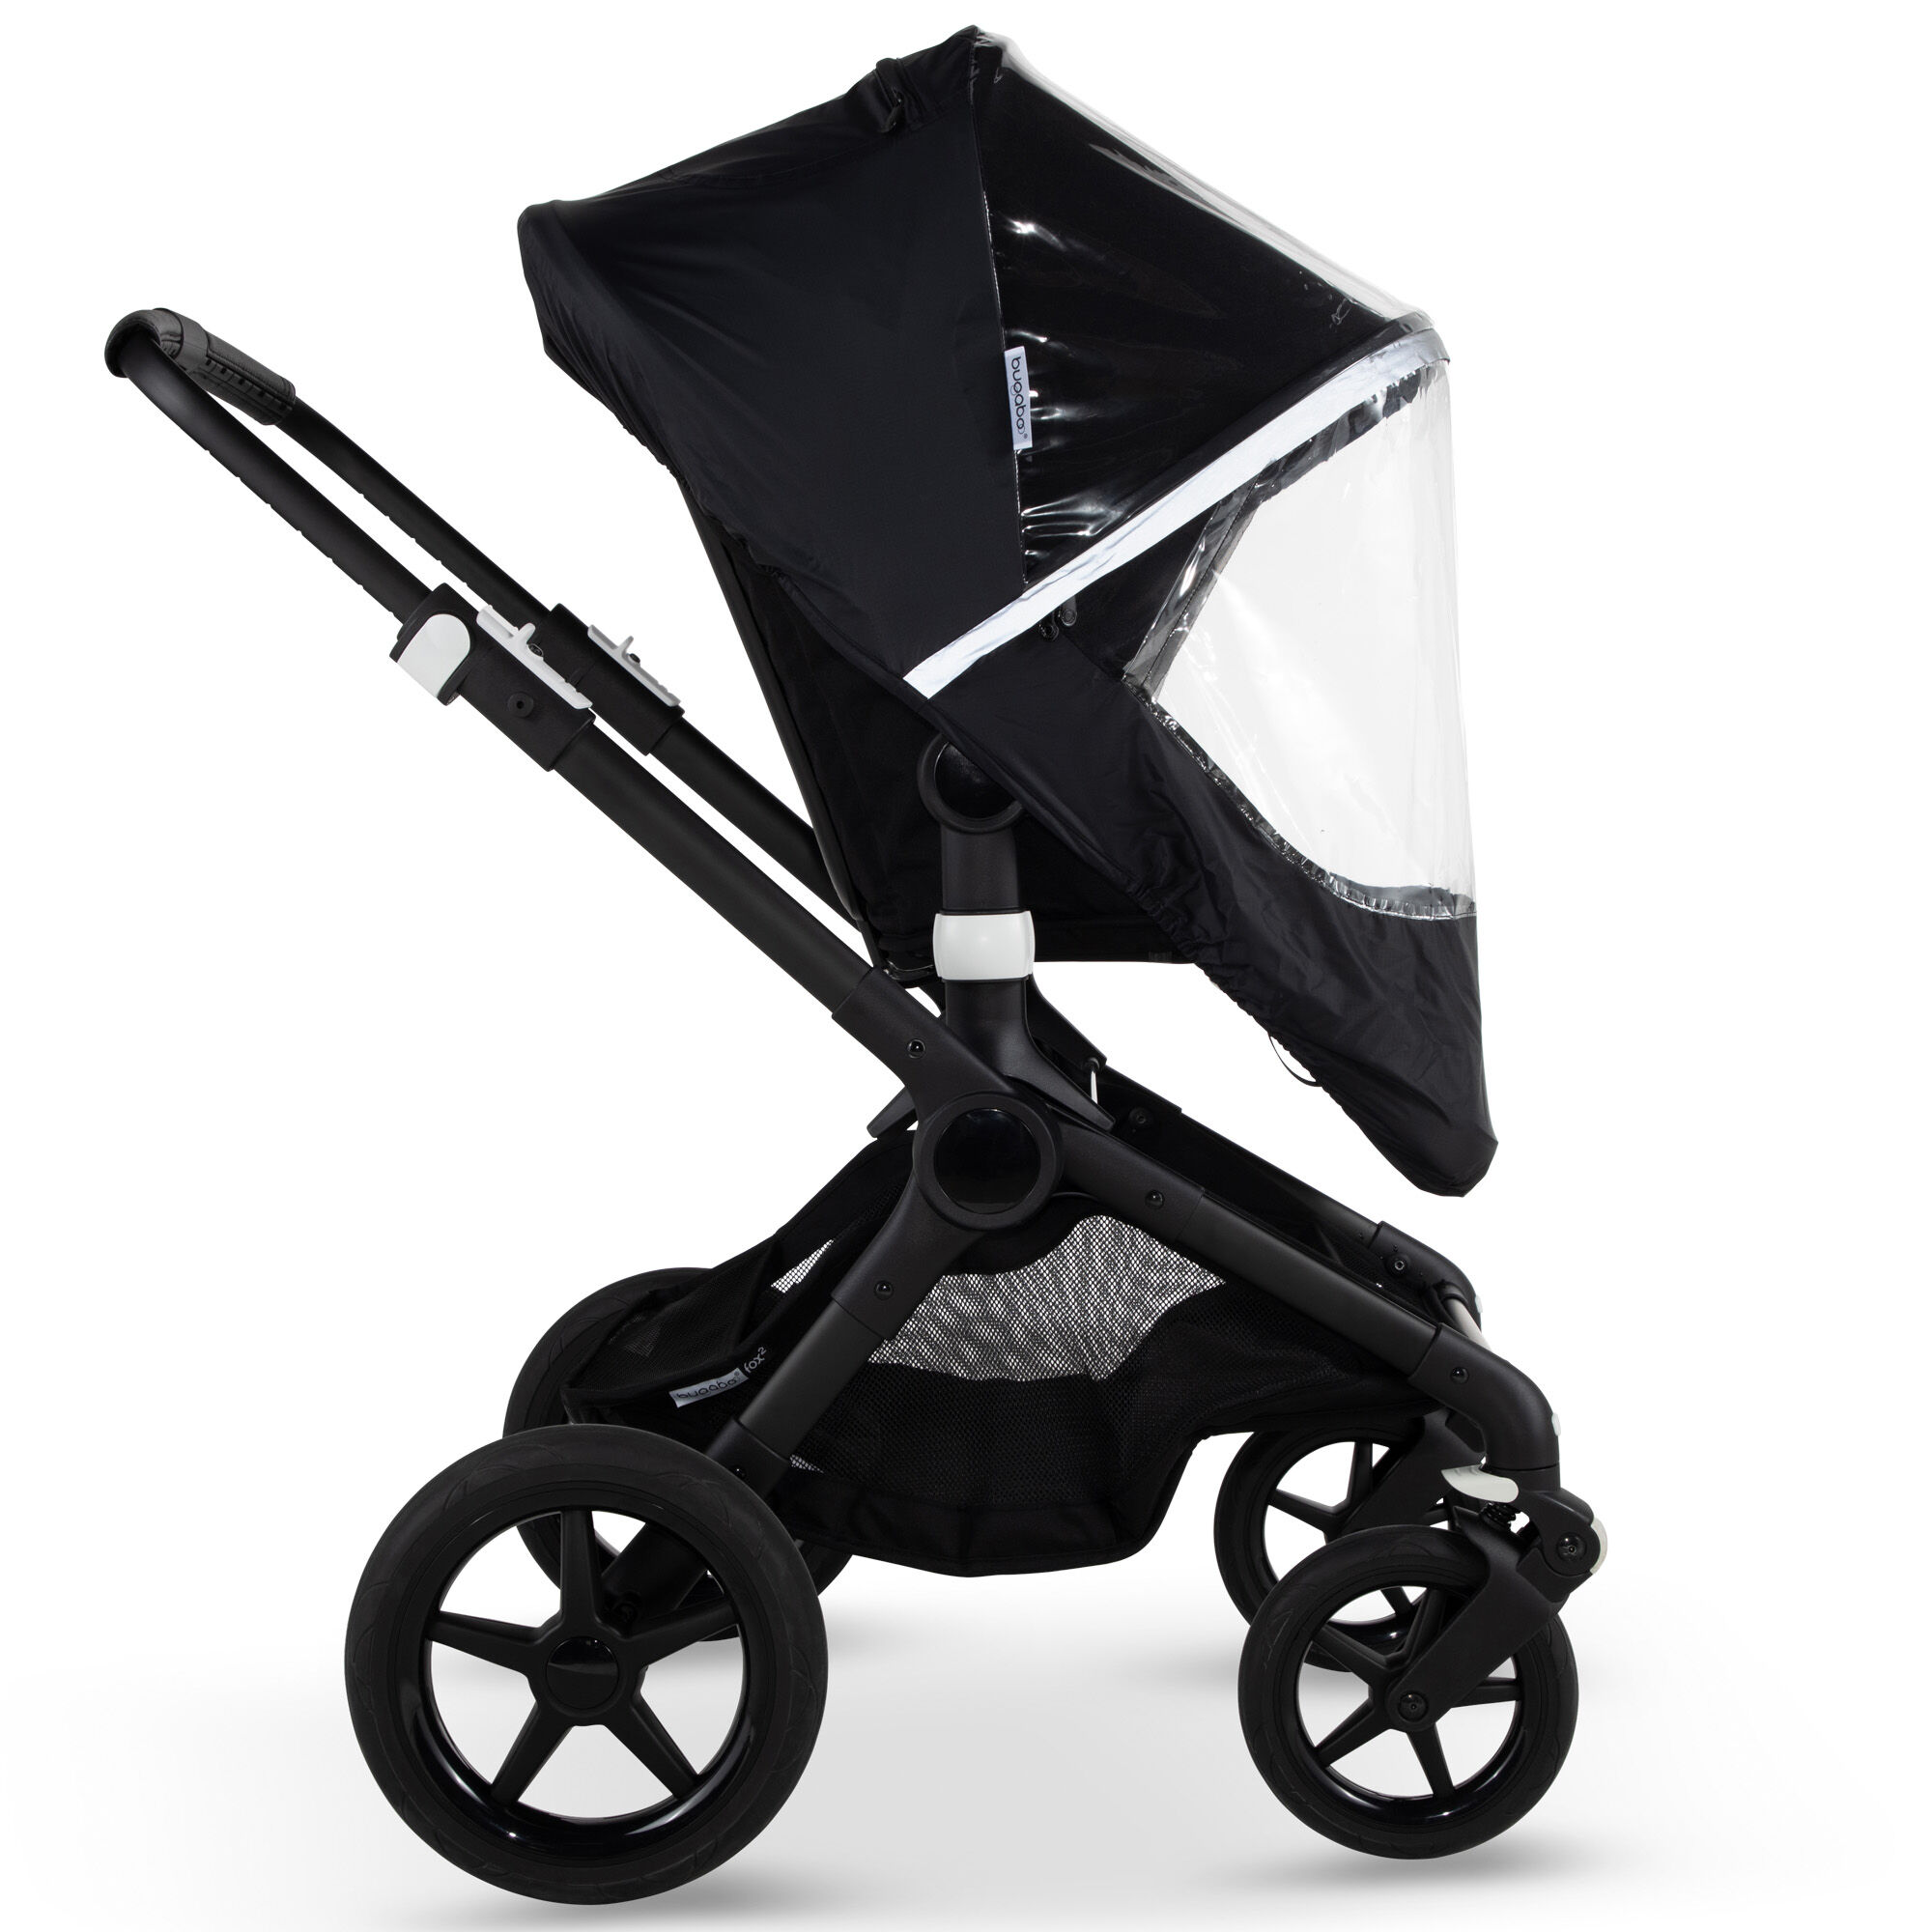 New RAINCOVER Zipped to fit Bugaboo Cameleon Carrycot & Pushchair Seat Unit 